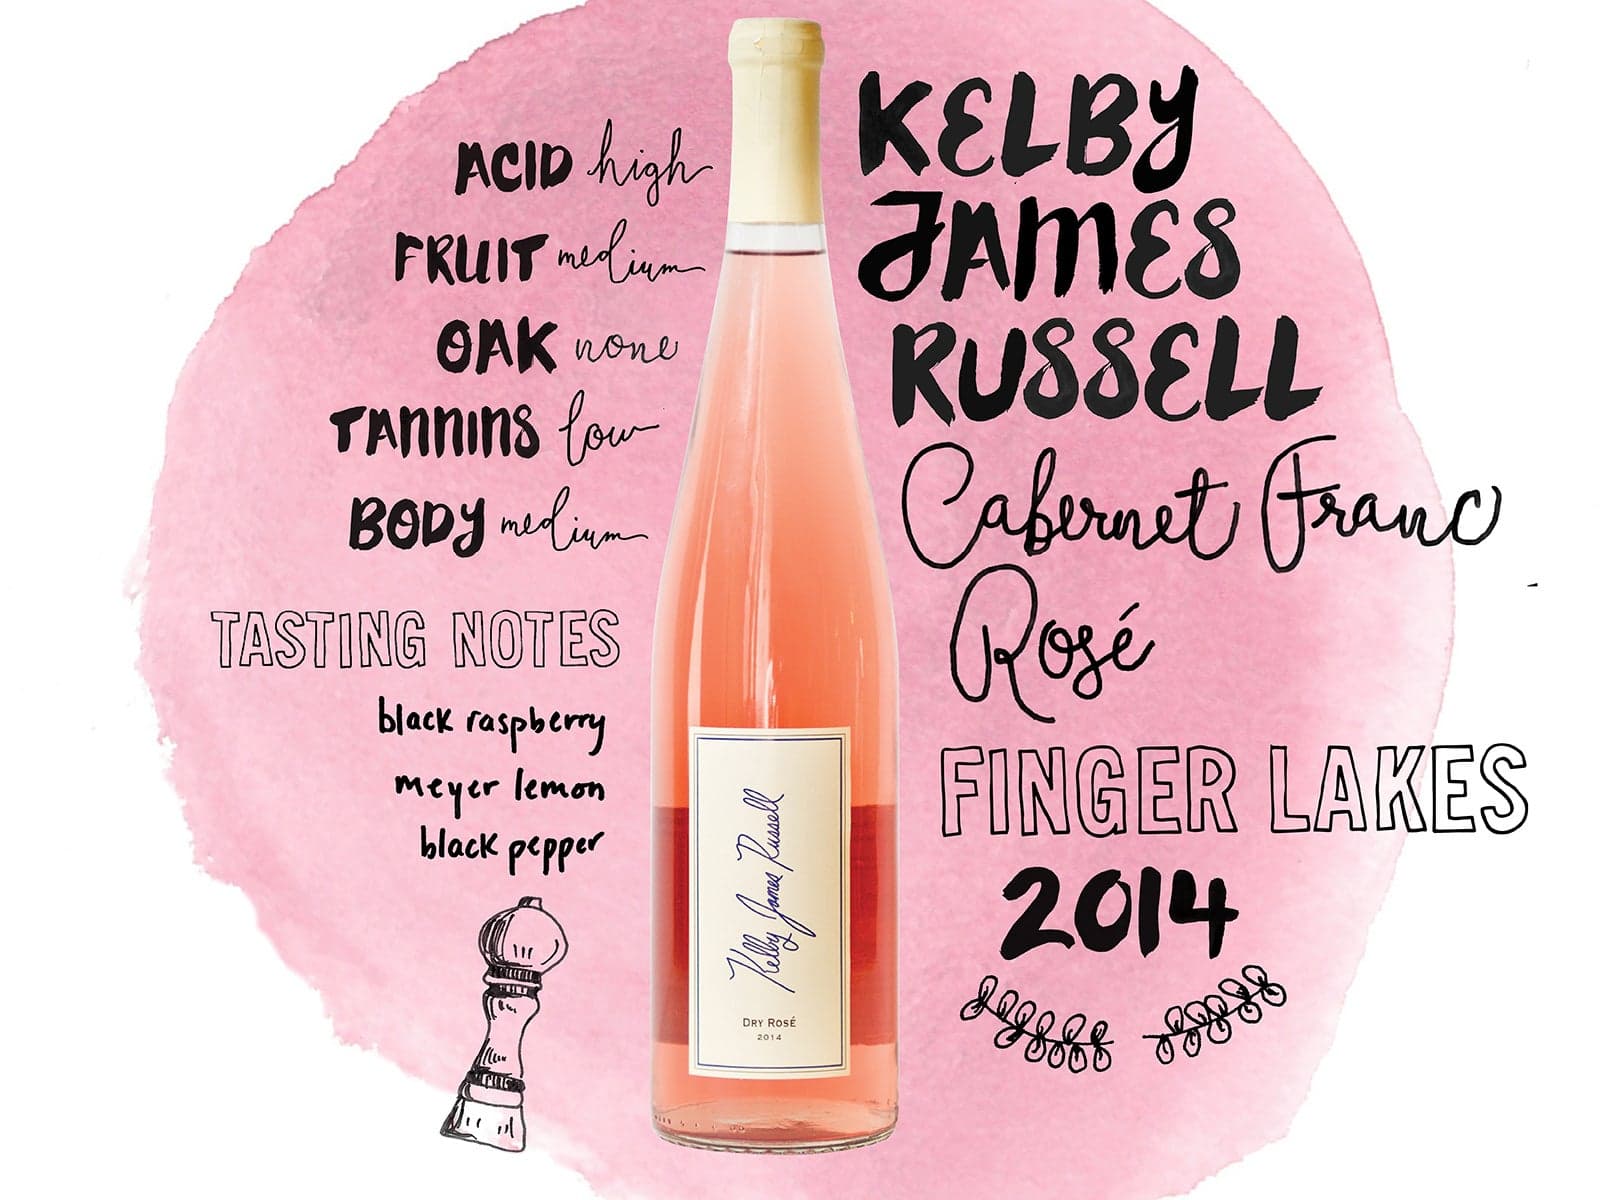 Kelby James Russell Cabernet Franc Rose, Finger Lakes, Rose Friday, Wine